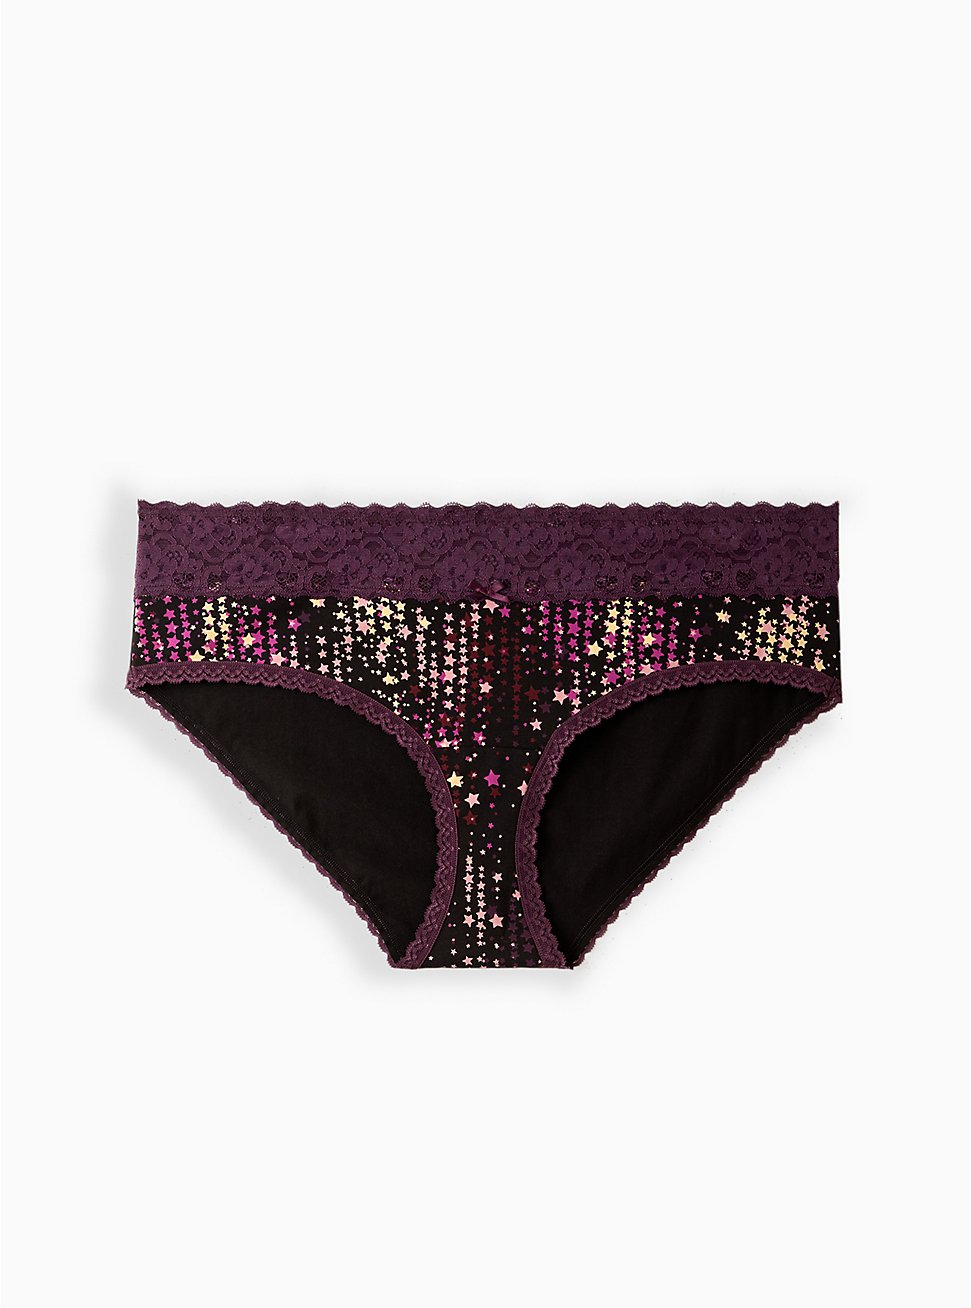 Plus Size Wide Lace Hipster Panty - Cotton Stars Purple, STAR LAYERS, hi-res